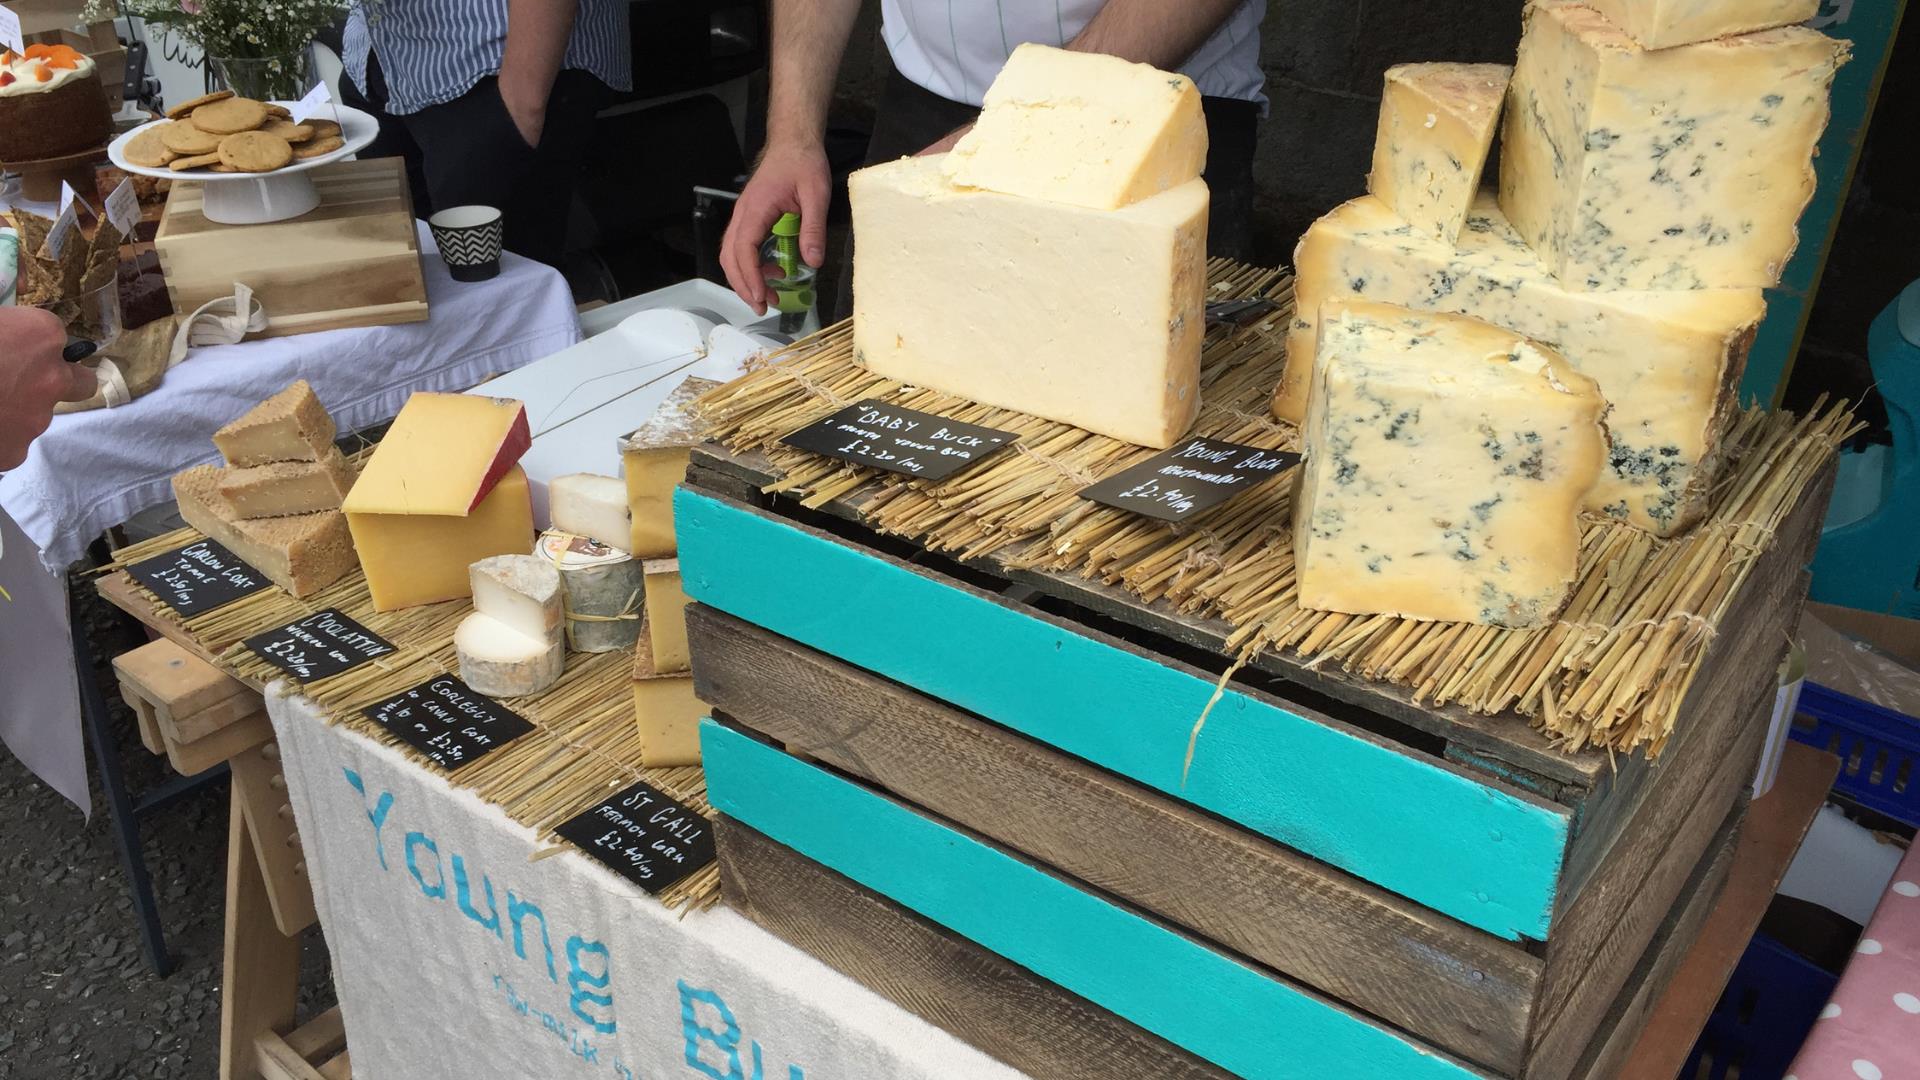 Image shows a stall showing a selection of cheese